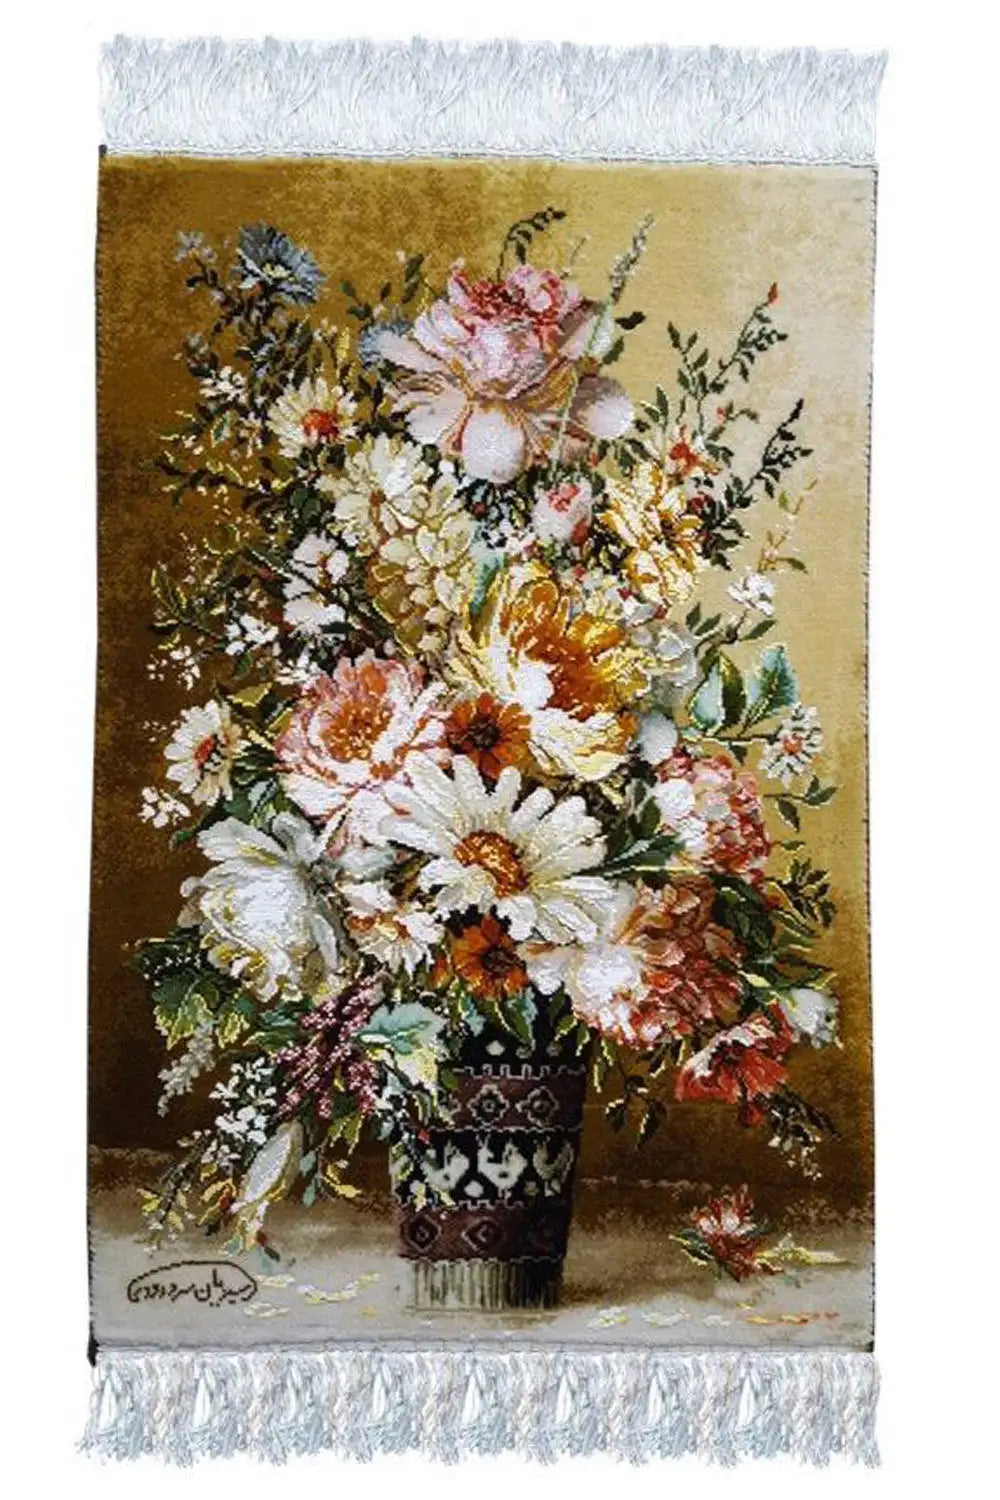 A beautiful bouquet of multi-colored flowers with designer vase.